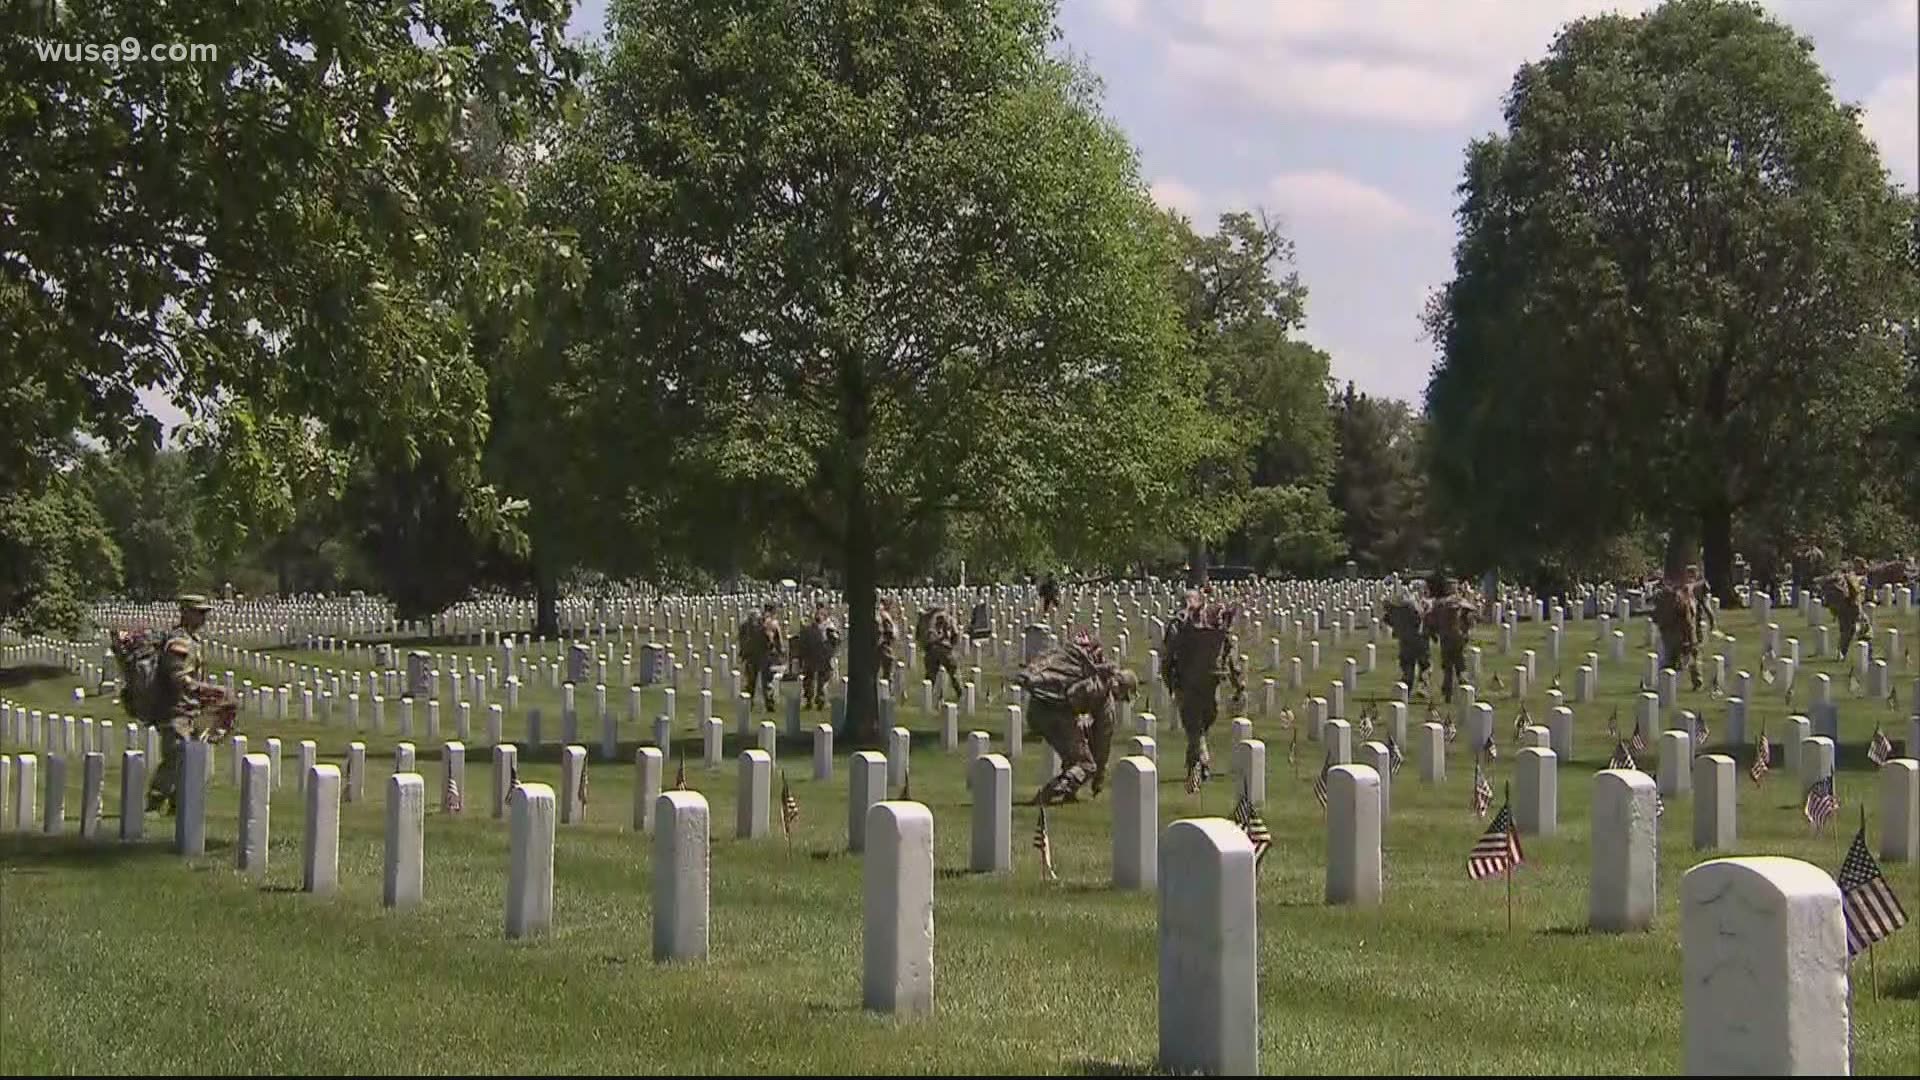 The flags in ceremony is an annual tradition at the cemetery.